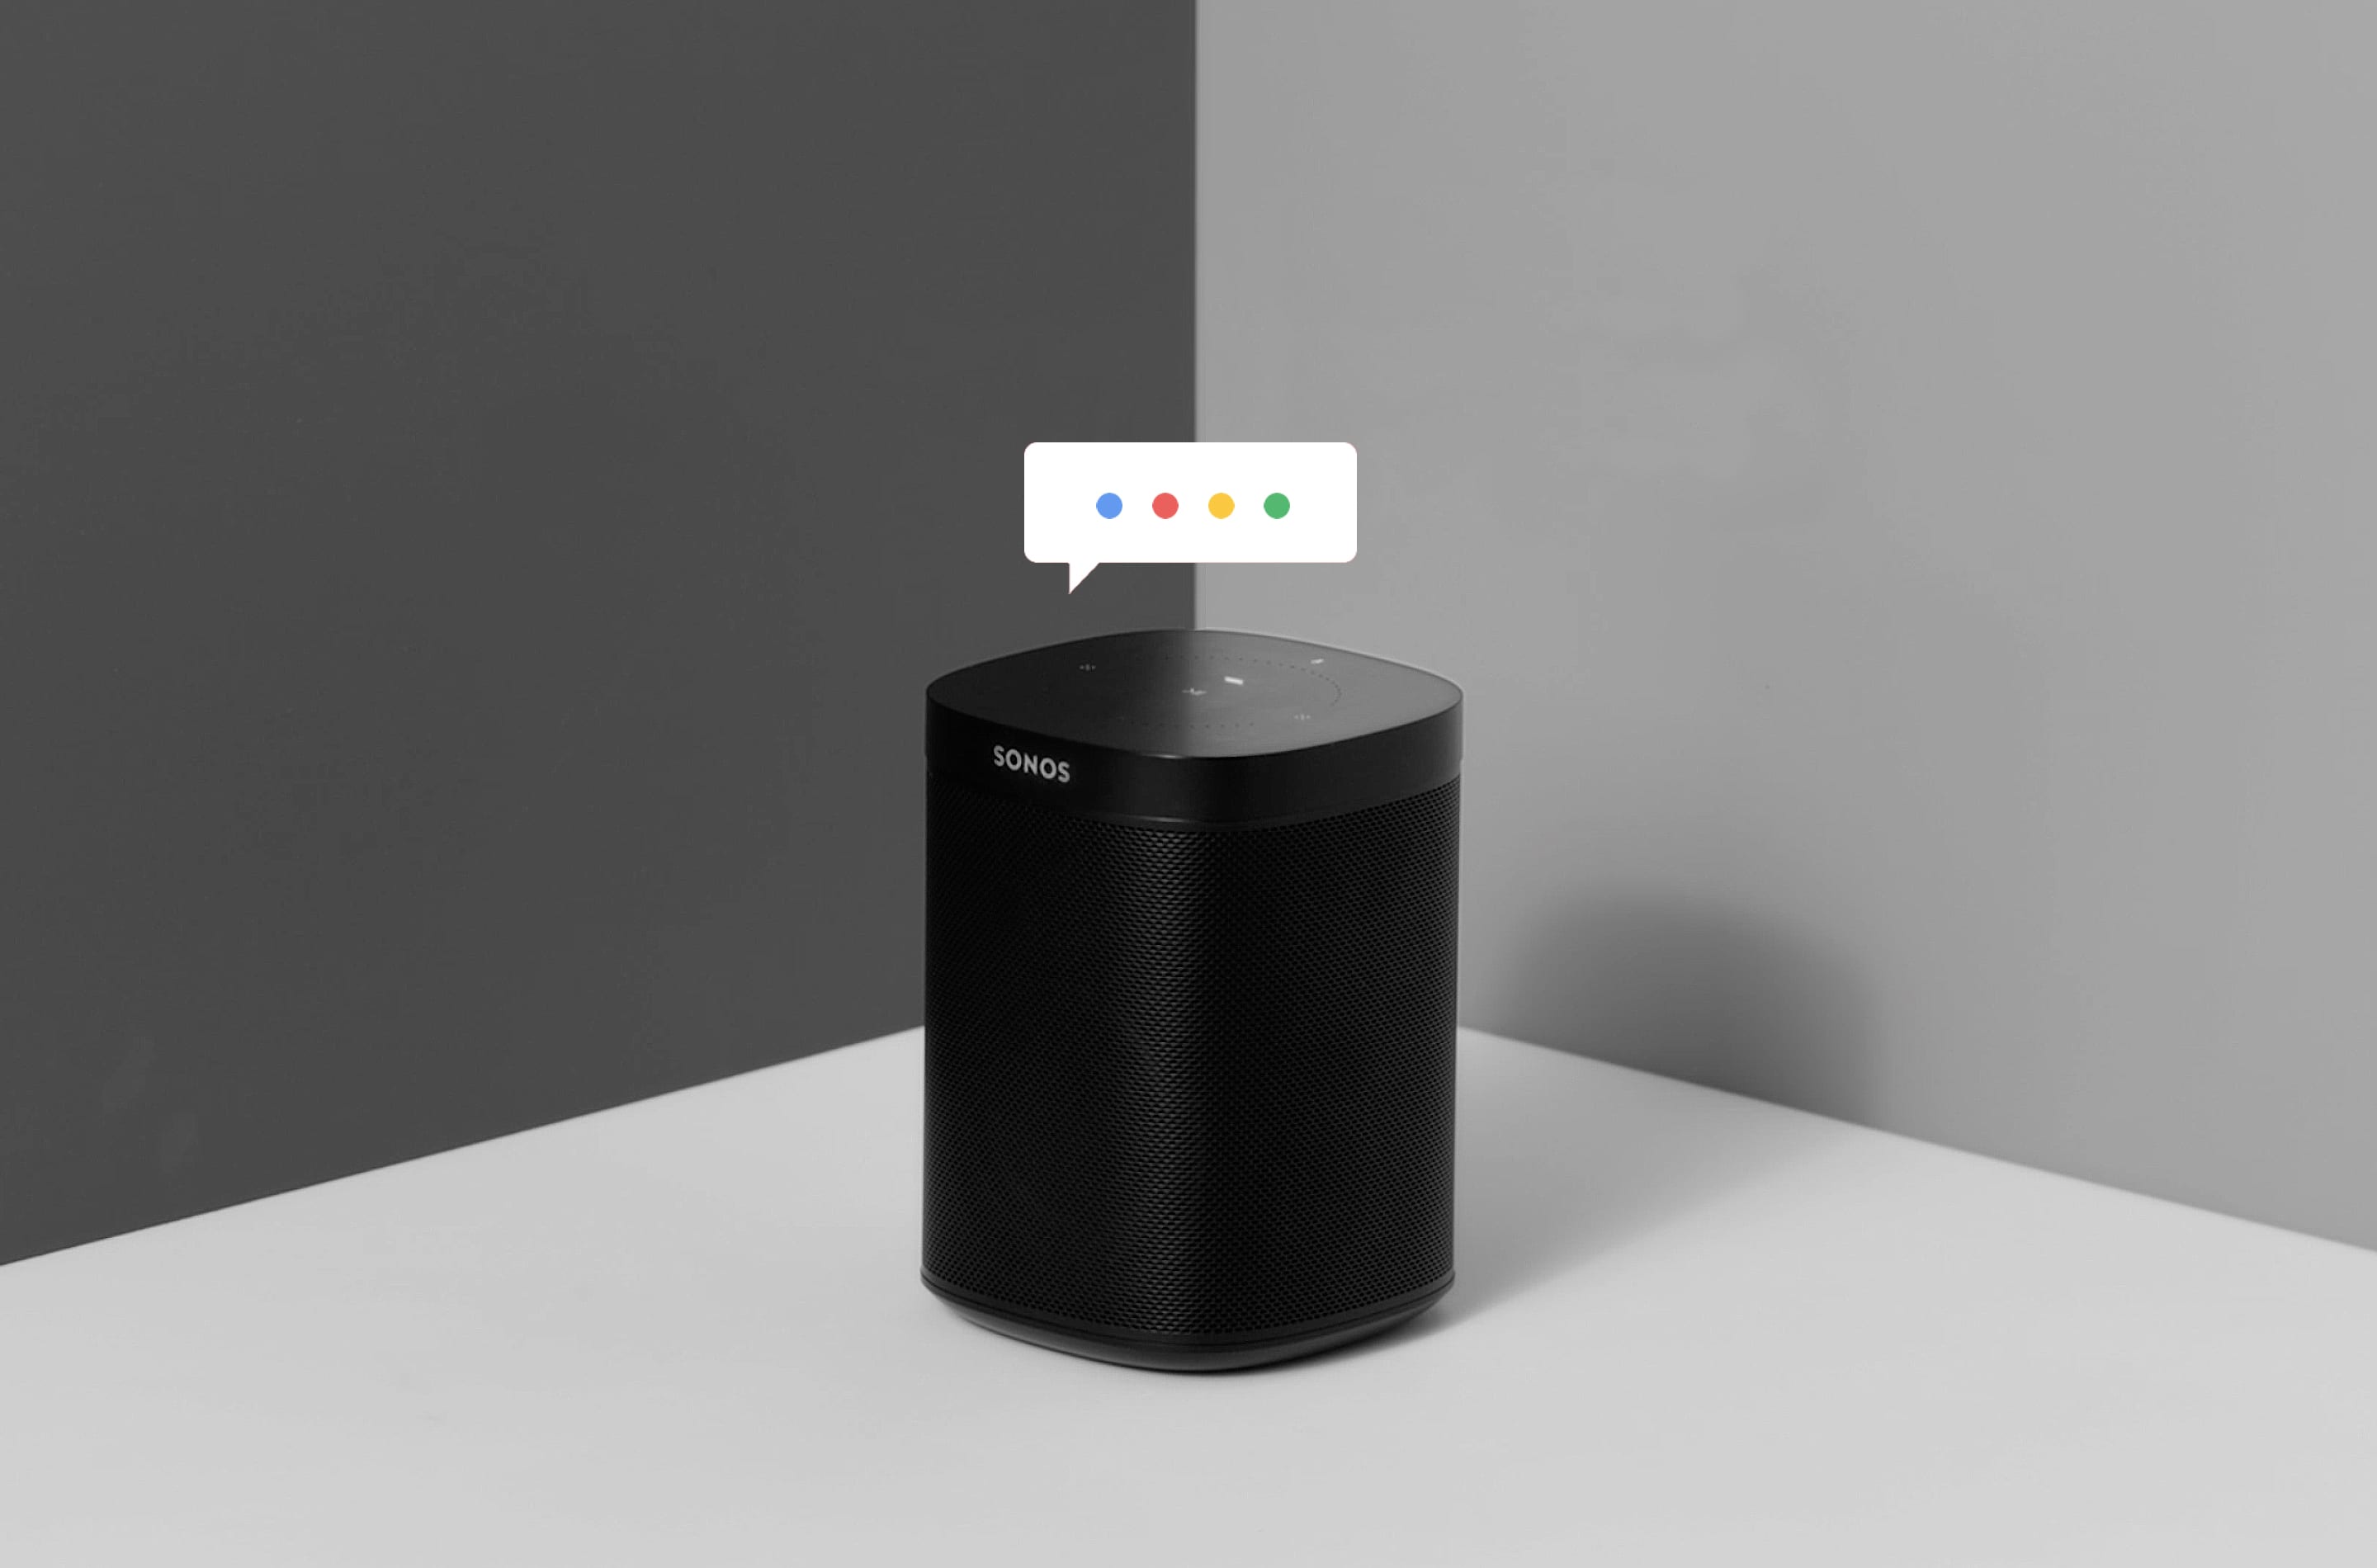 Sonos delay their Google Assistant support until next year